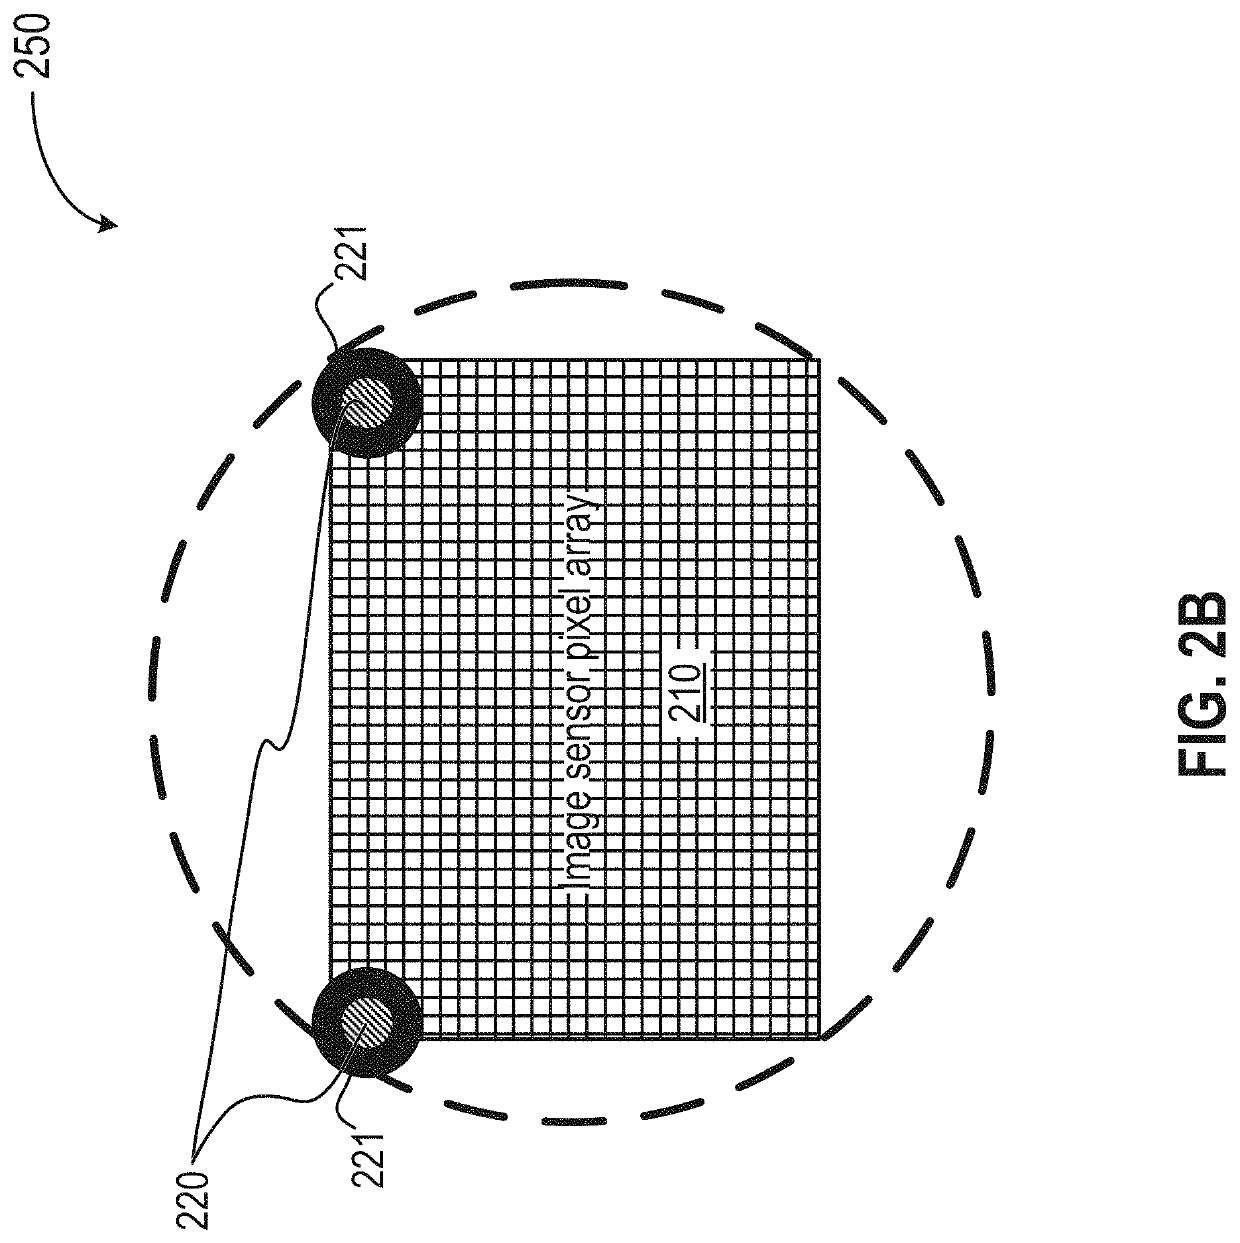 Global shutter pixel circuit and method for computer vision applications